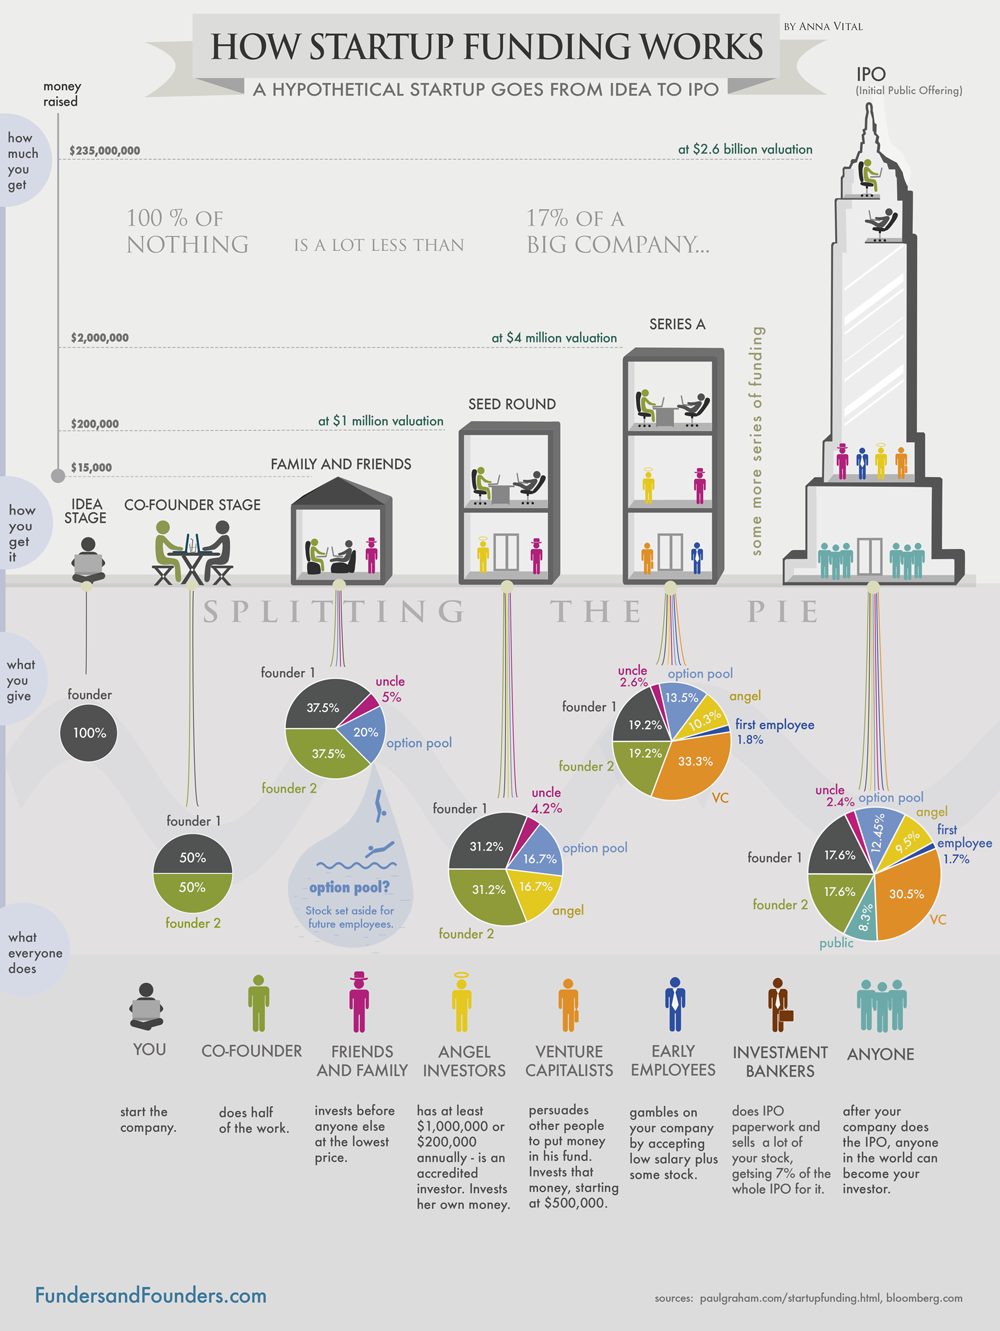 How startup funding works